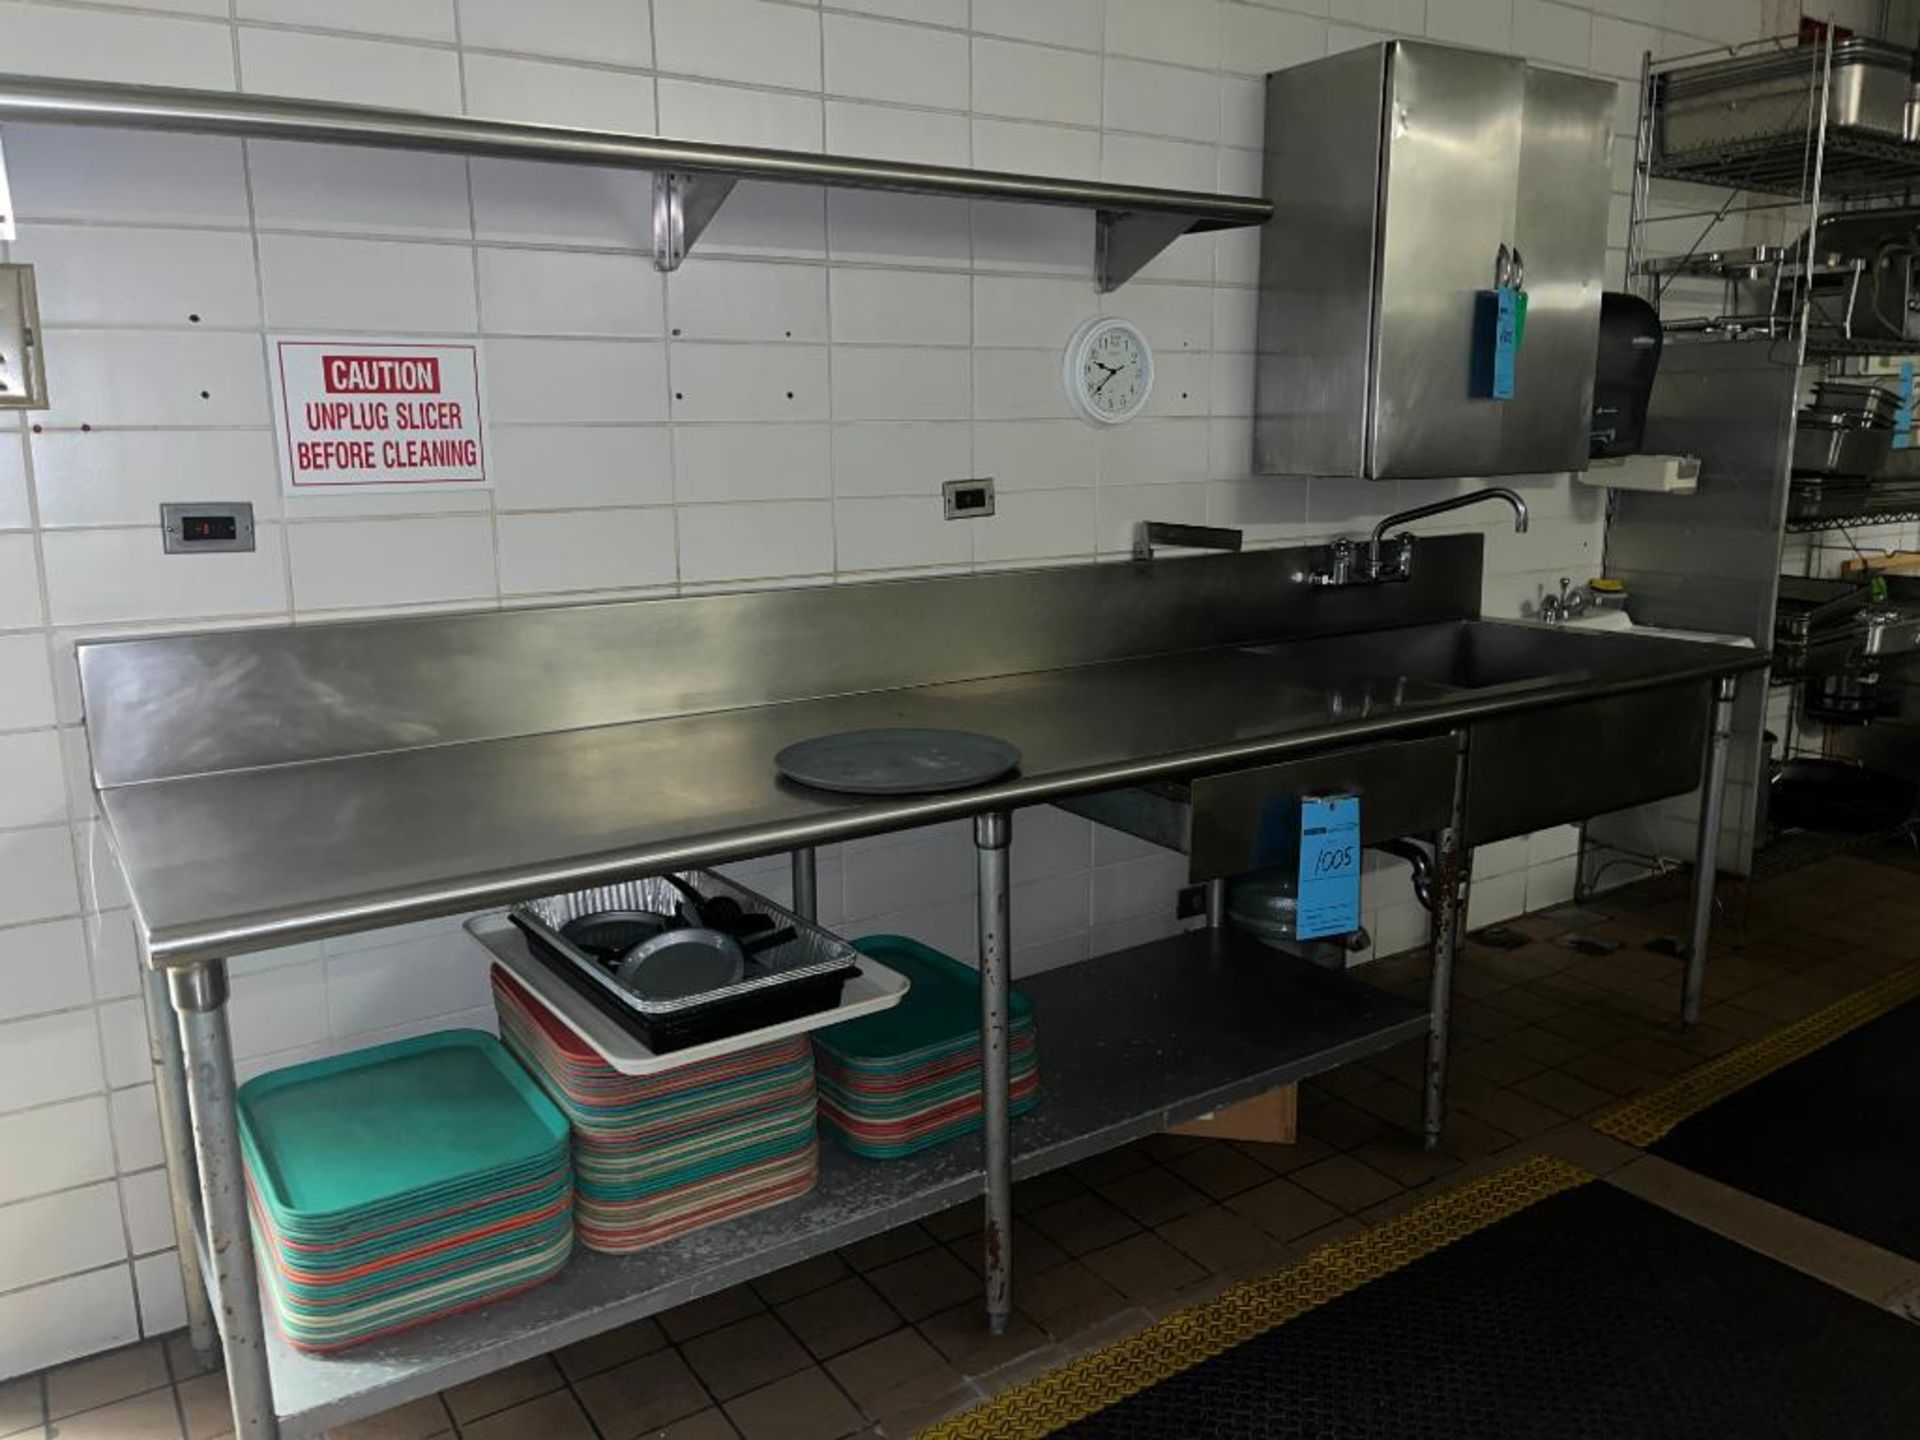 Lot (3): 117" x 28" Stainless Steel preptable w/ 30" 24" Sink, Stainless Upper Cabinet & Stainless S